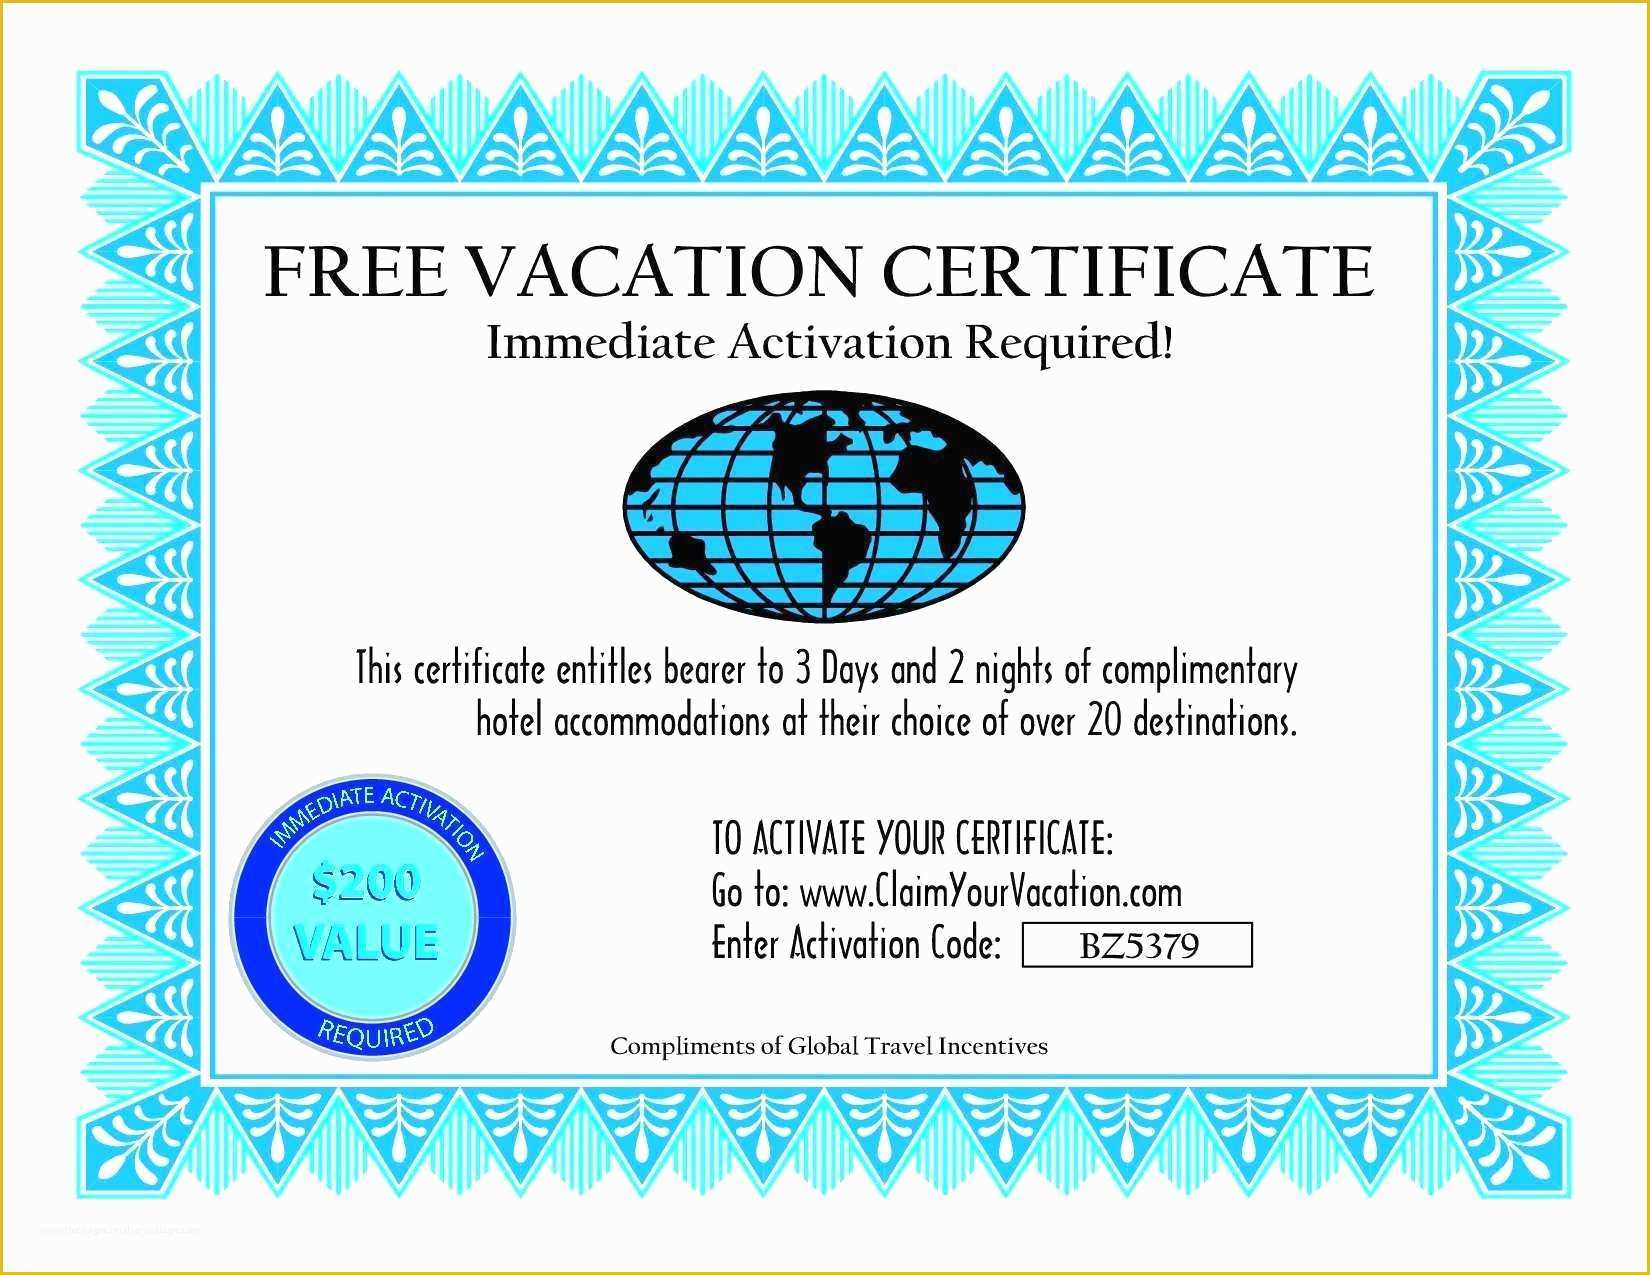 Printable Travel Gift Certificate Template